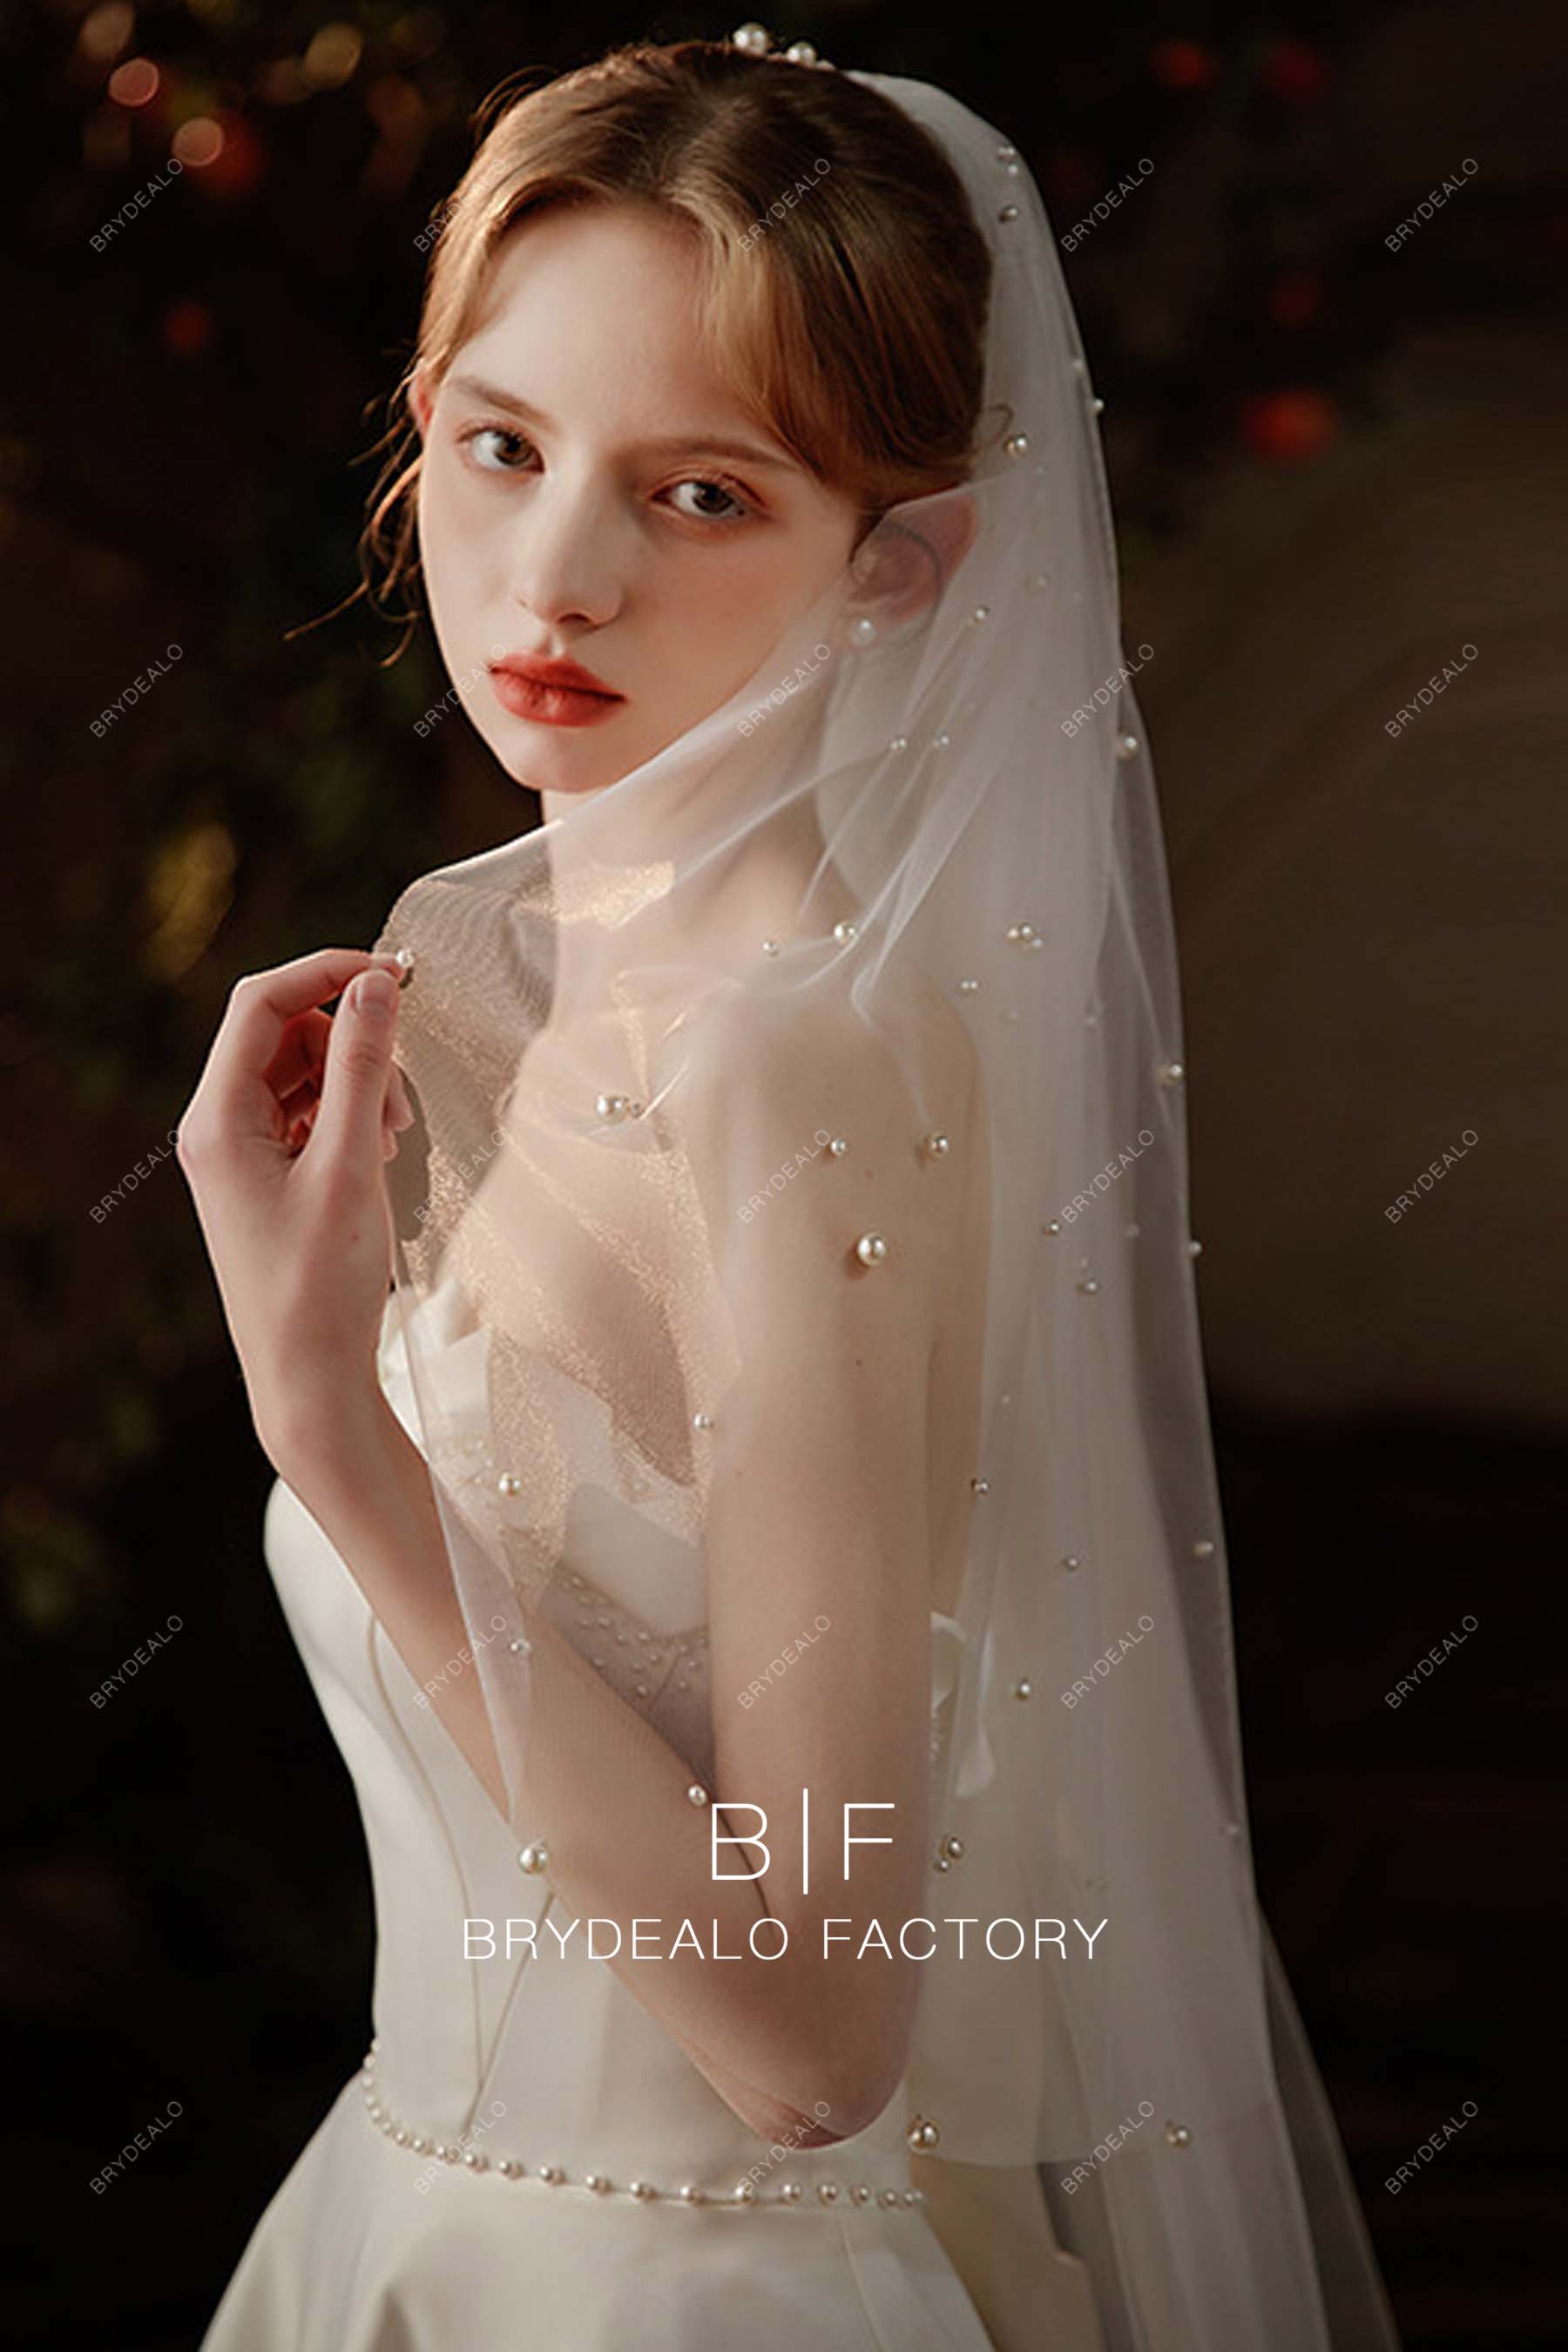 Chapel Veil, Pearl Tulle by Grace + Ivory